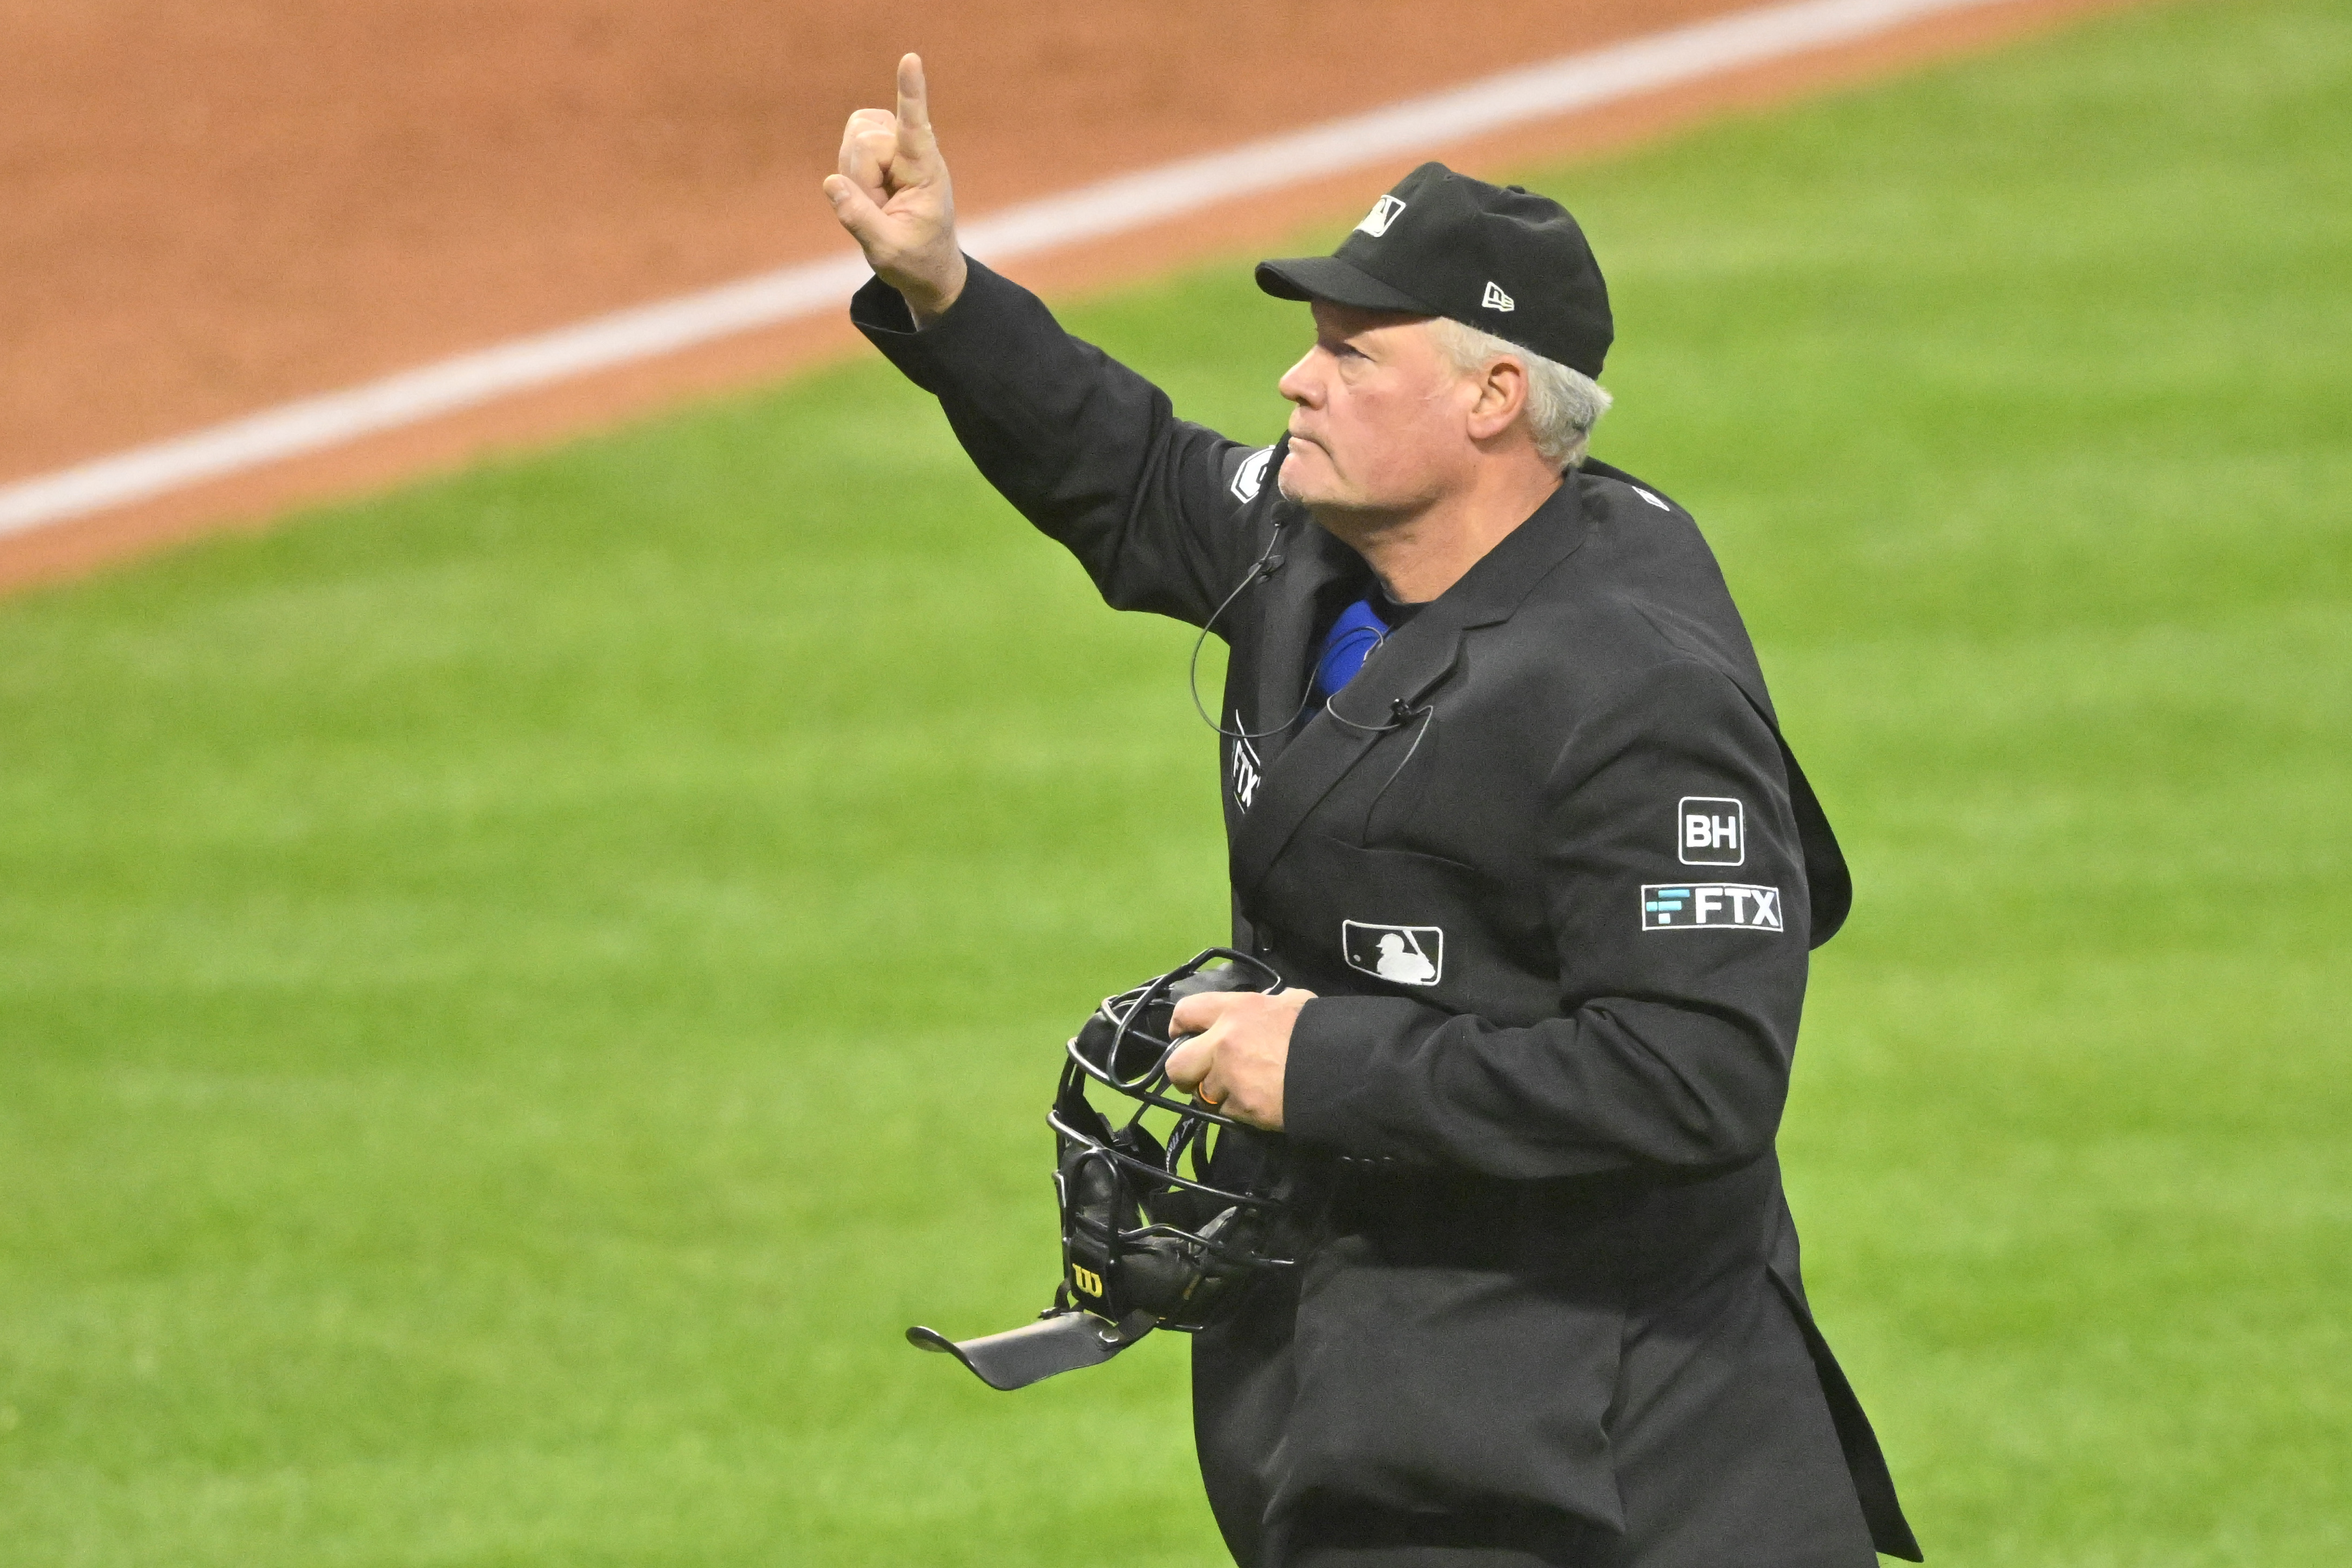 Marlboroughs Jim Reynolds calls it a career after 24 years as an MLB umpire   The Boston Globe